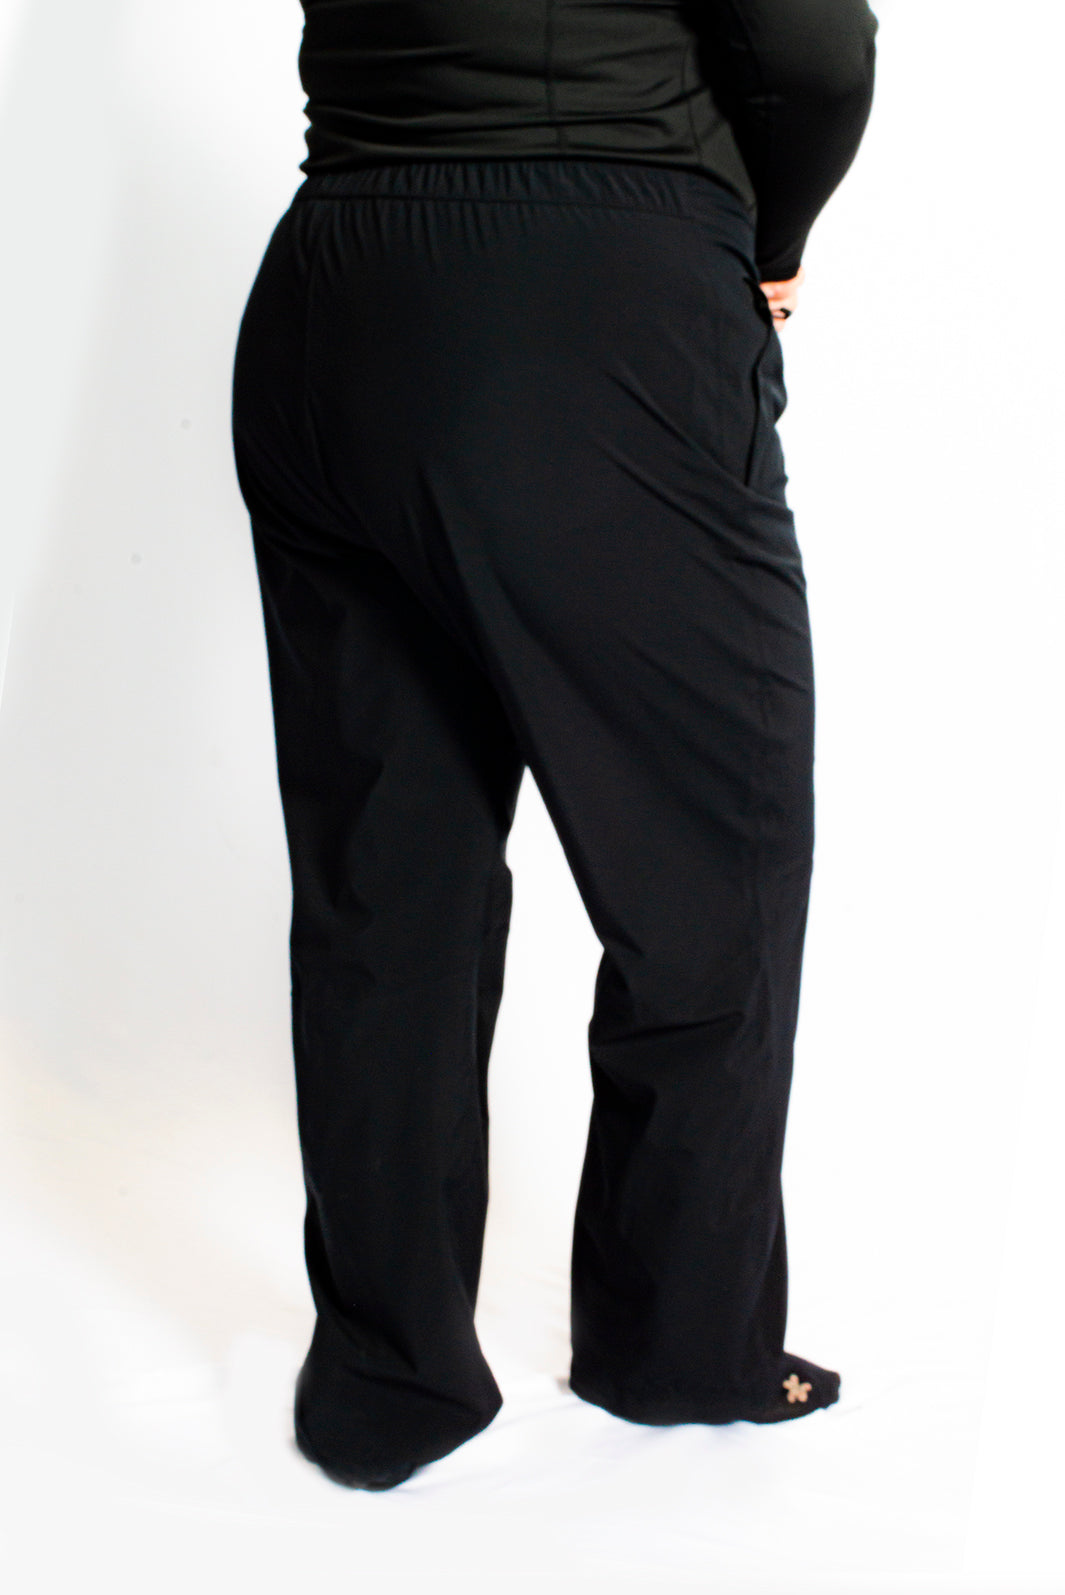 Plus Size SEALED PII Performance Waterproof Breathable Pants by Sportive Plus